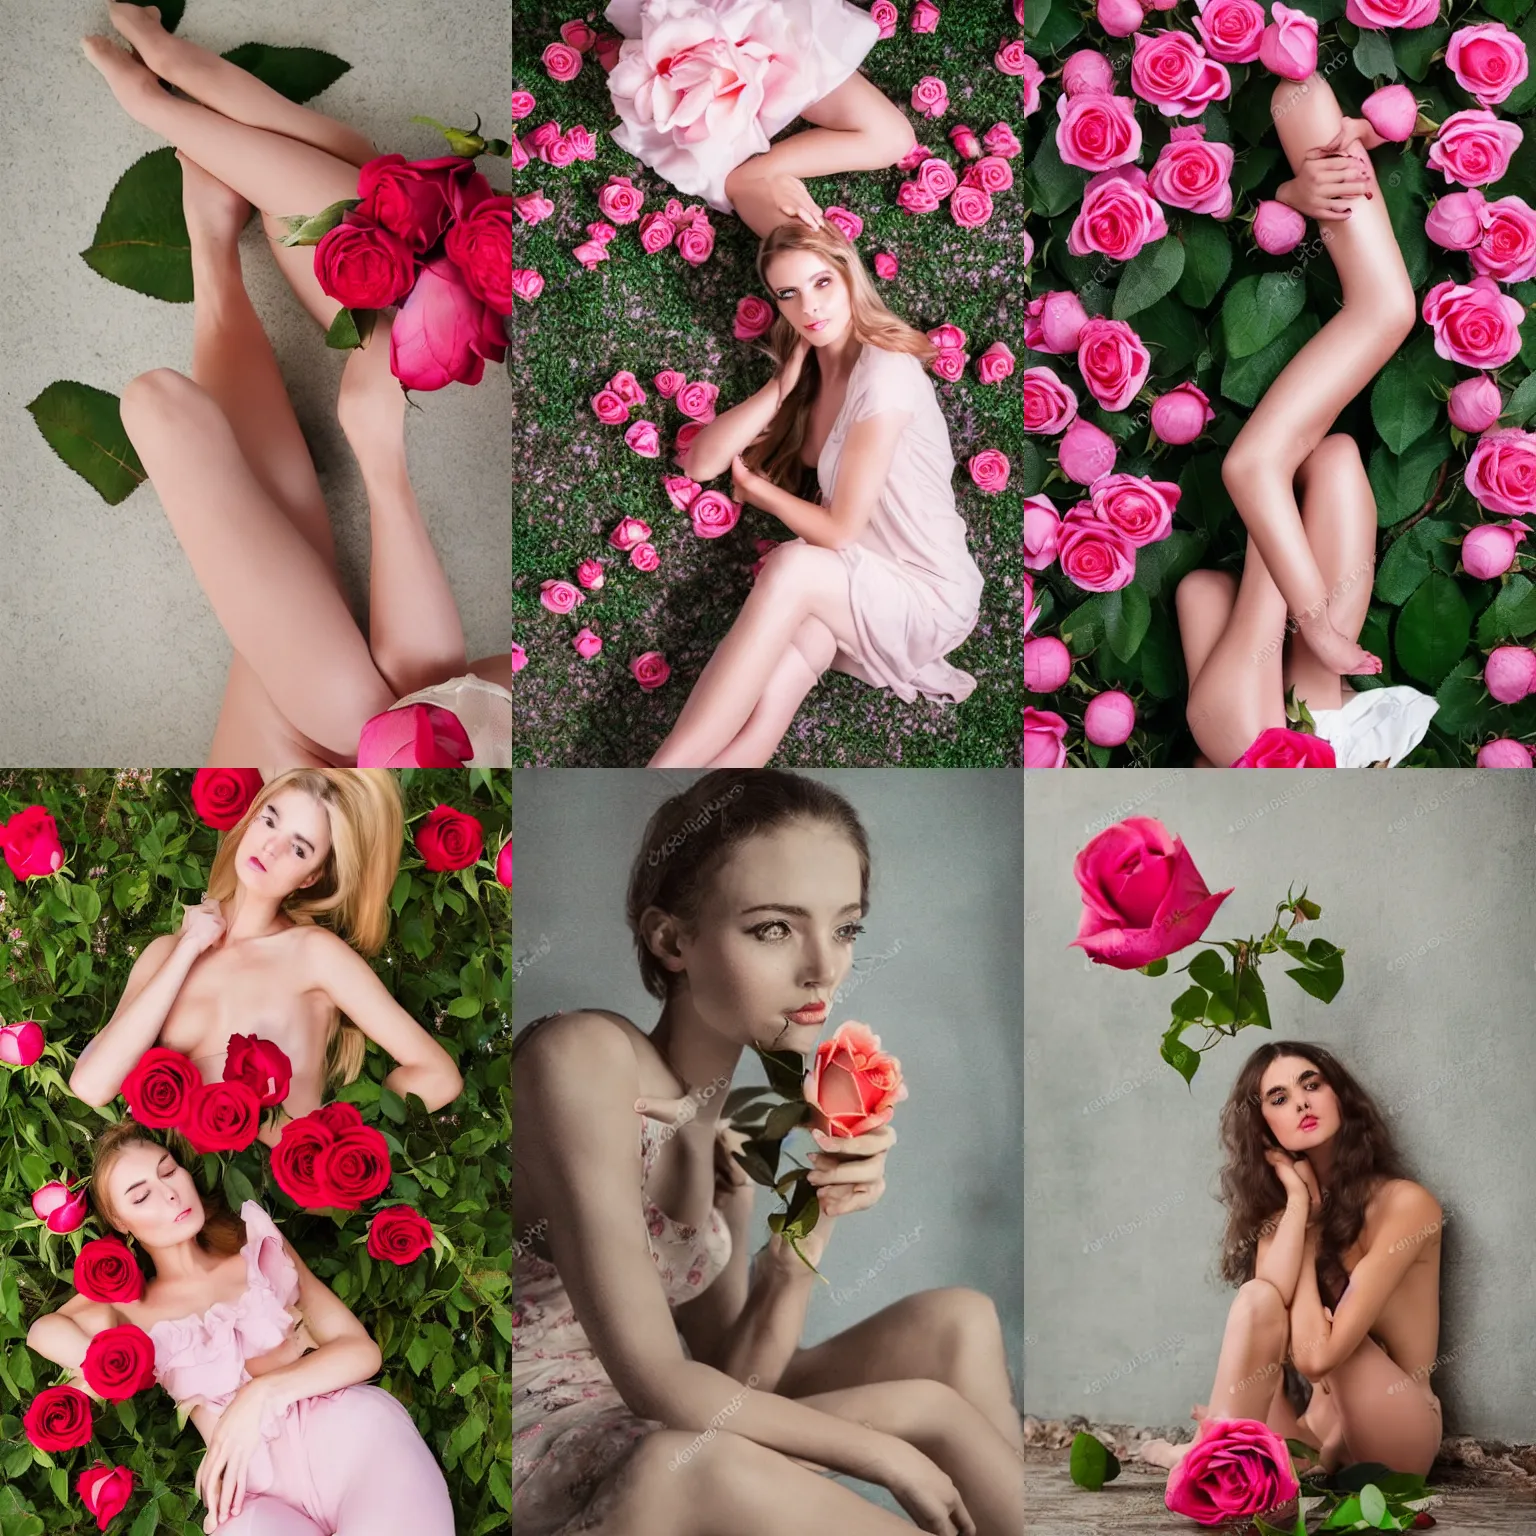 Prompt: 1970 studio photography feminine roses pereskia sensual a stock photo featured on pexels by Vladimir Baranov-Rossine a woman sitting on the ground next to a rose